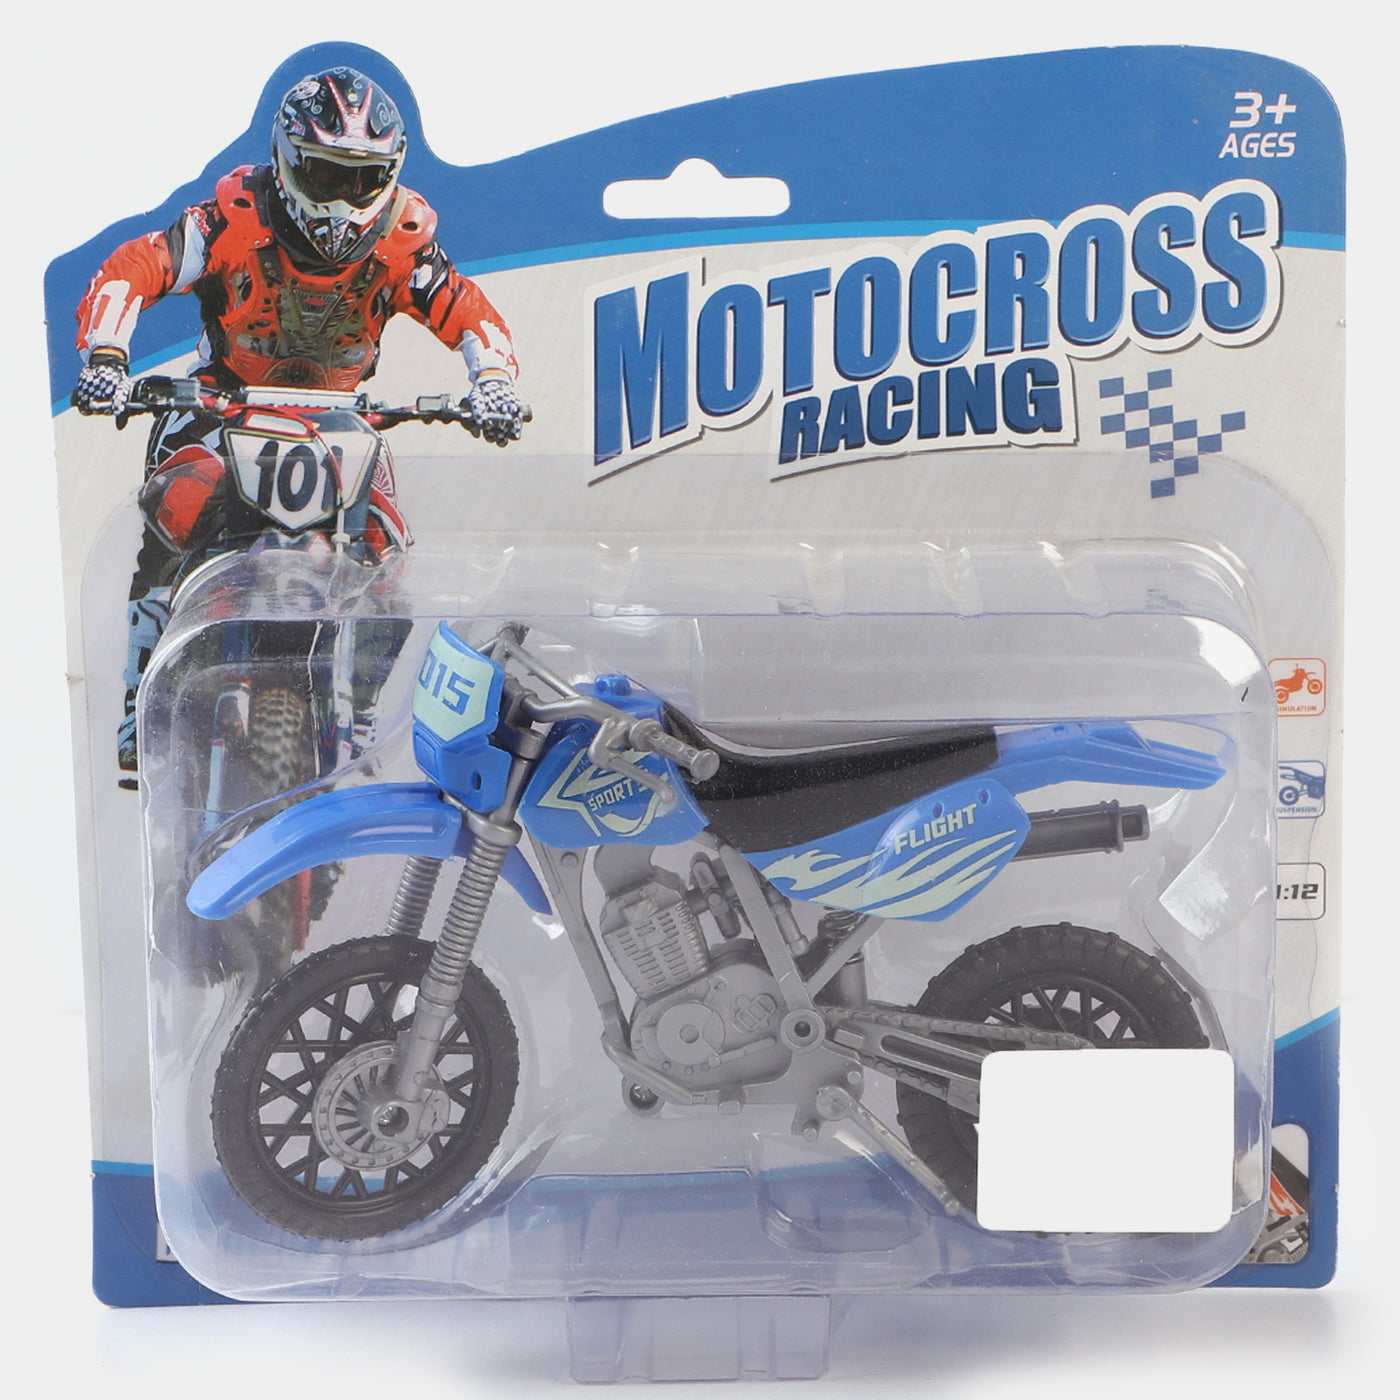 Motocross Racing Toy For Kids